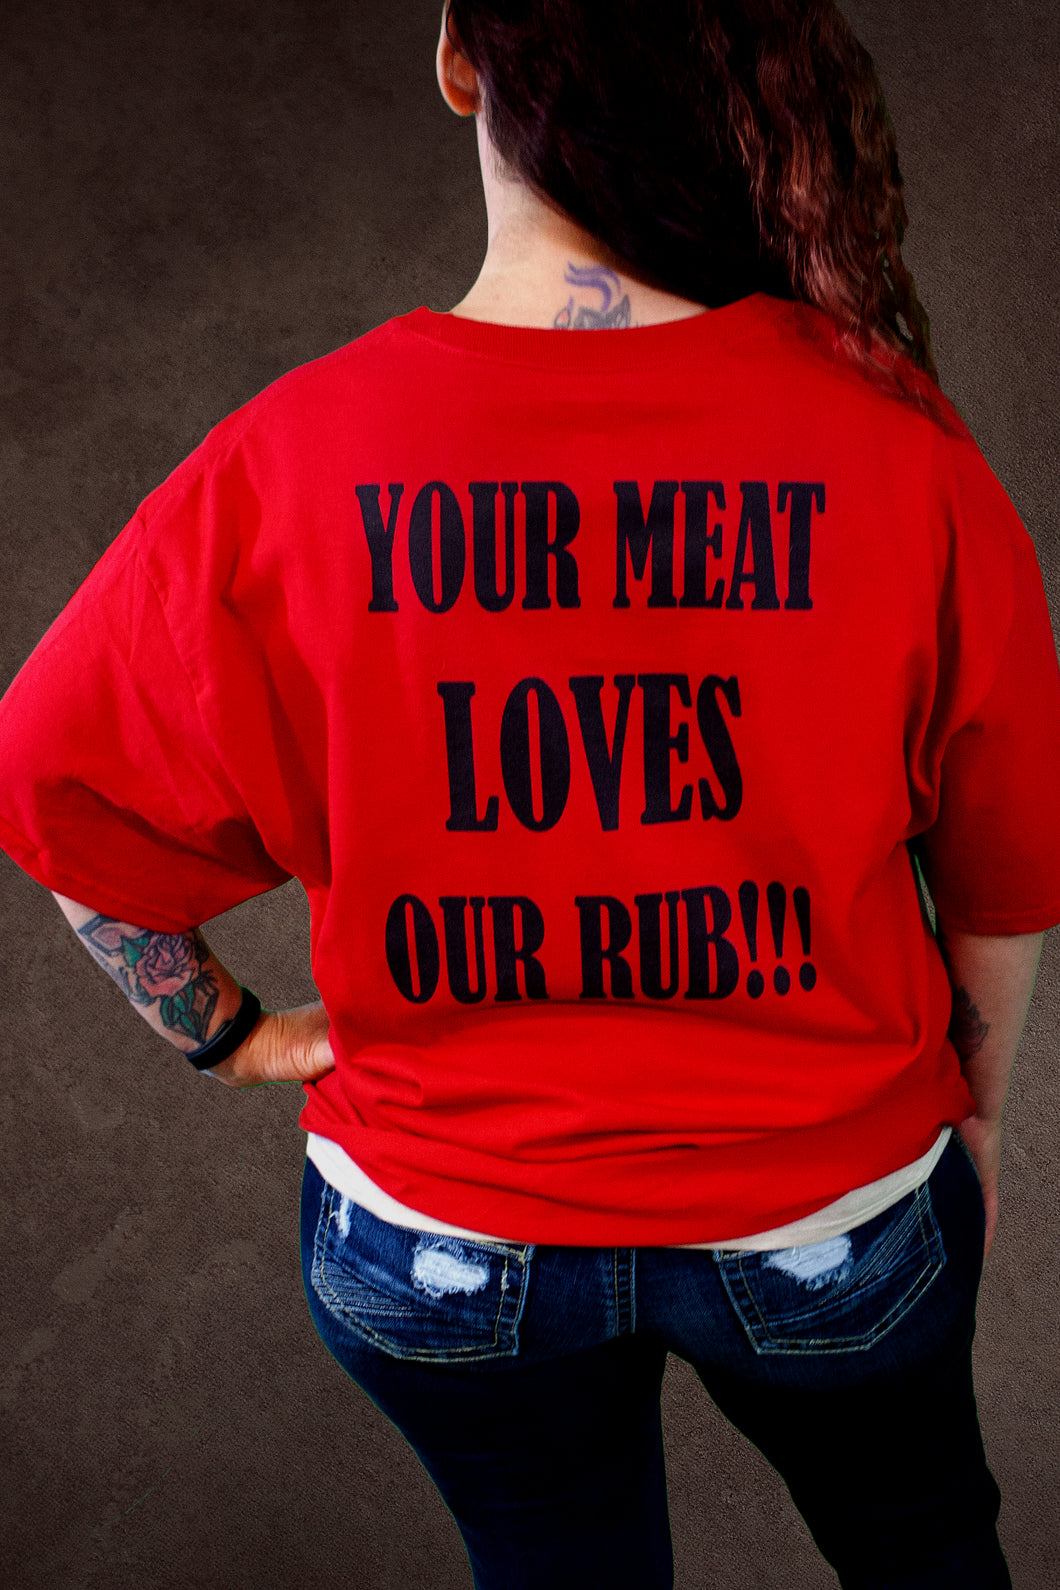 T-Shirt “YOUR MEAT LOVES OUR RUB!!!”